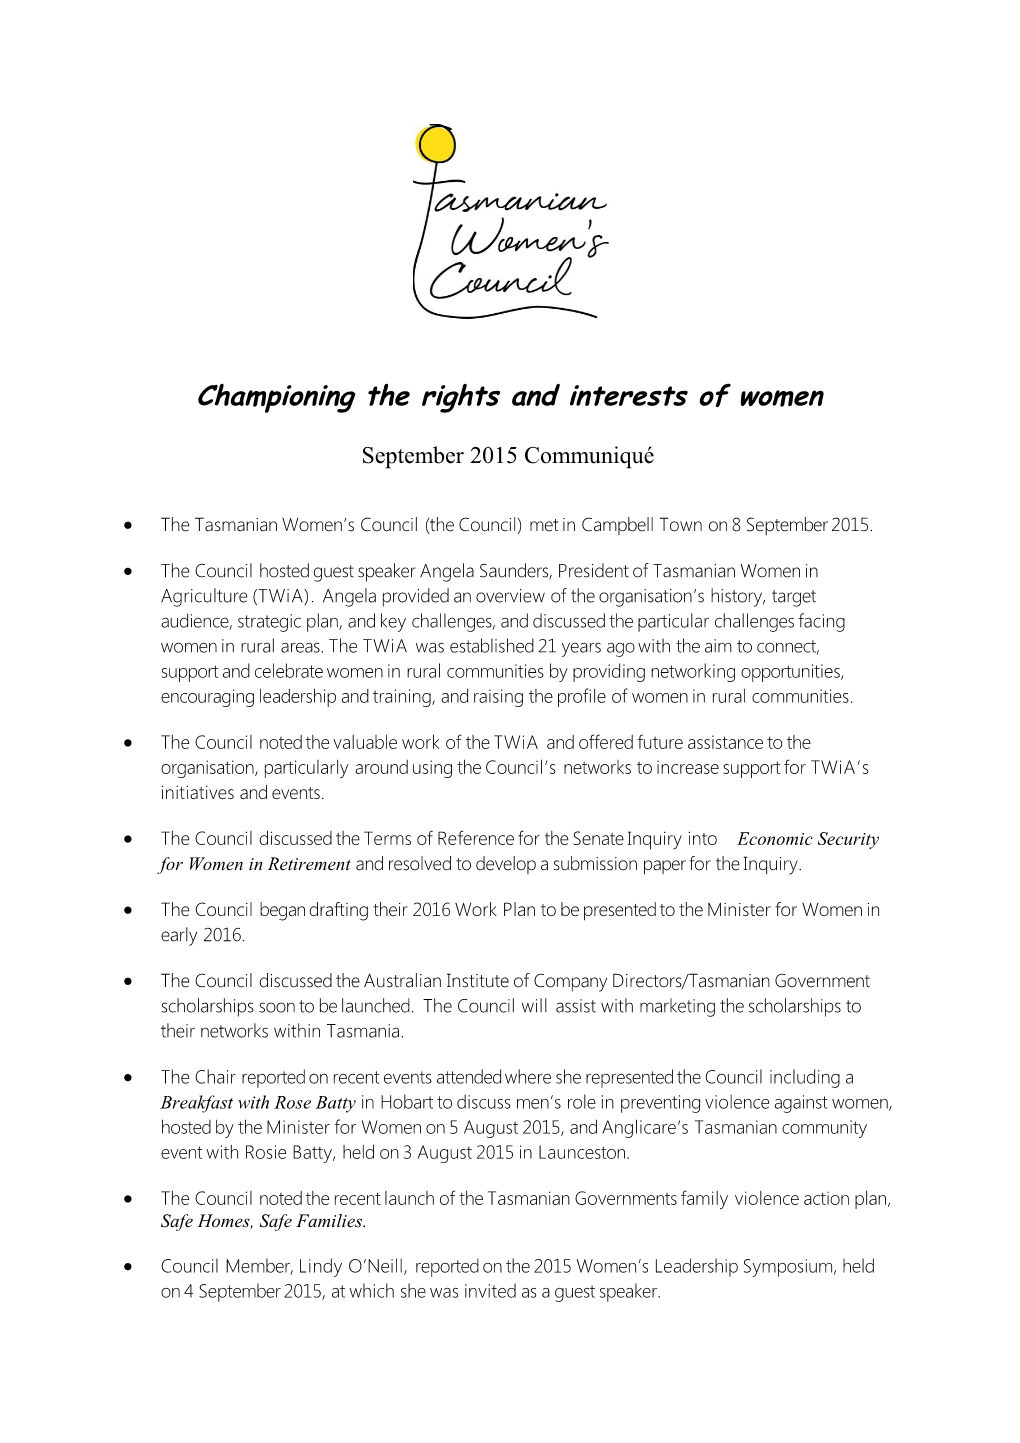 Championing the Rights and Interests of Women